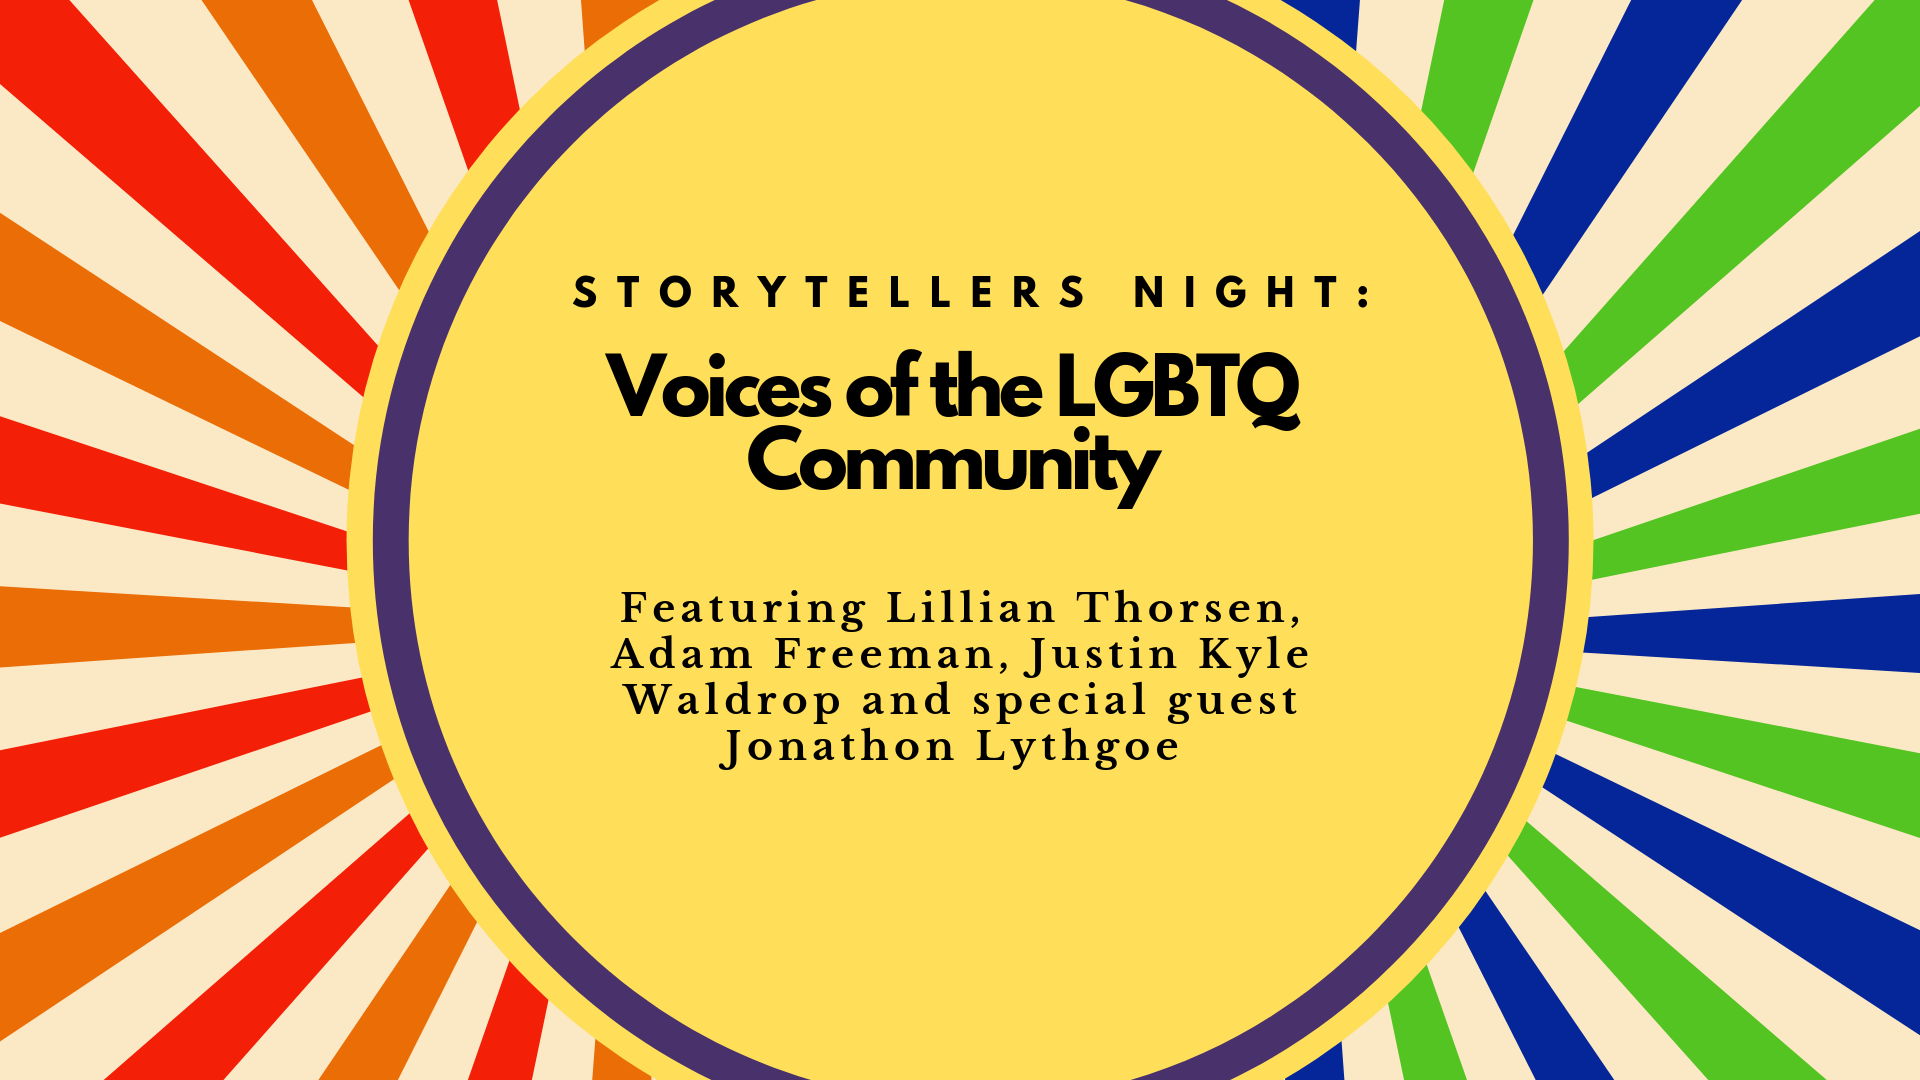 Storytellers Night: Voices of the LGBTQ Community